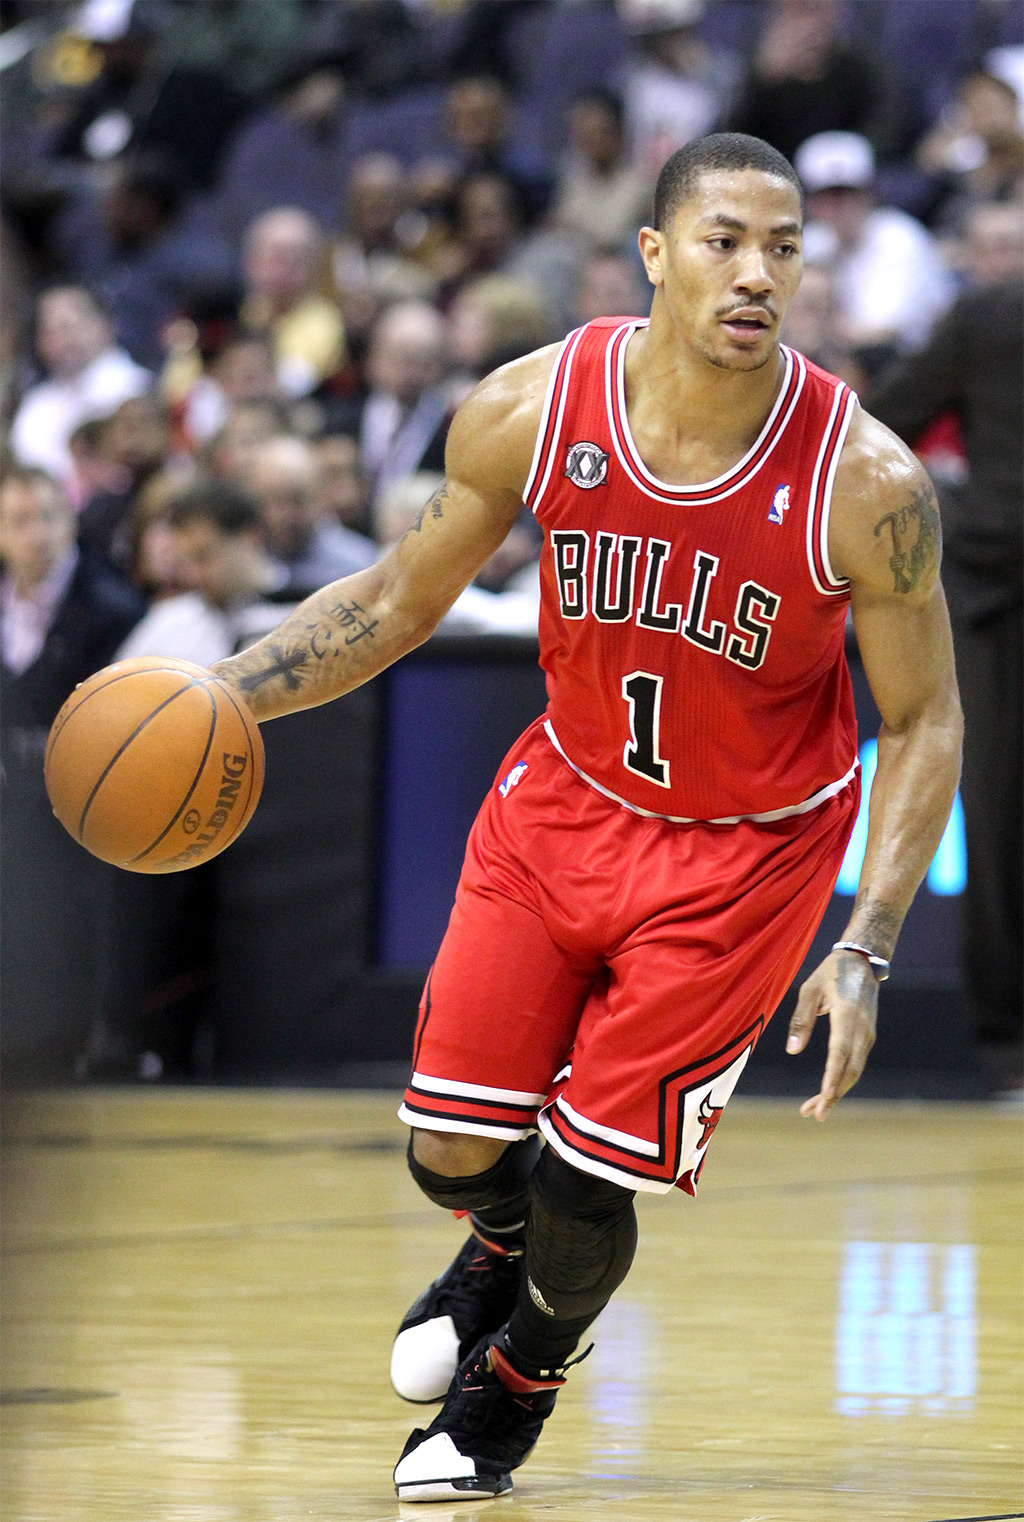 Did You Know? NBA star Derrick Rose was born in Illinois